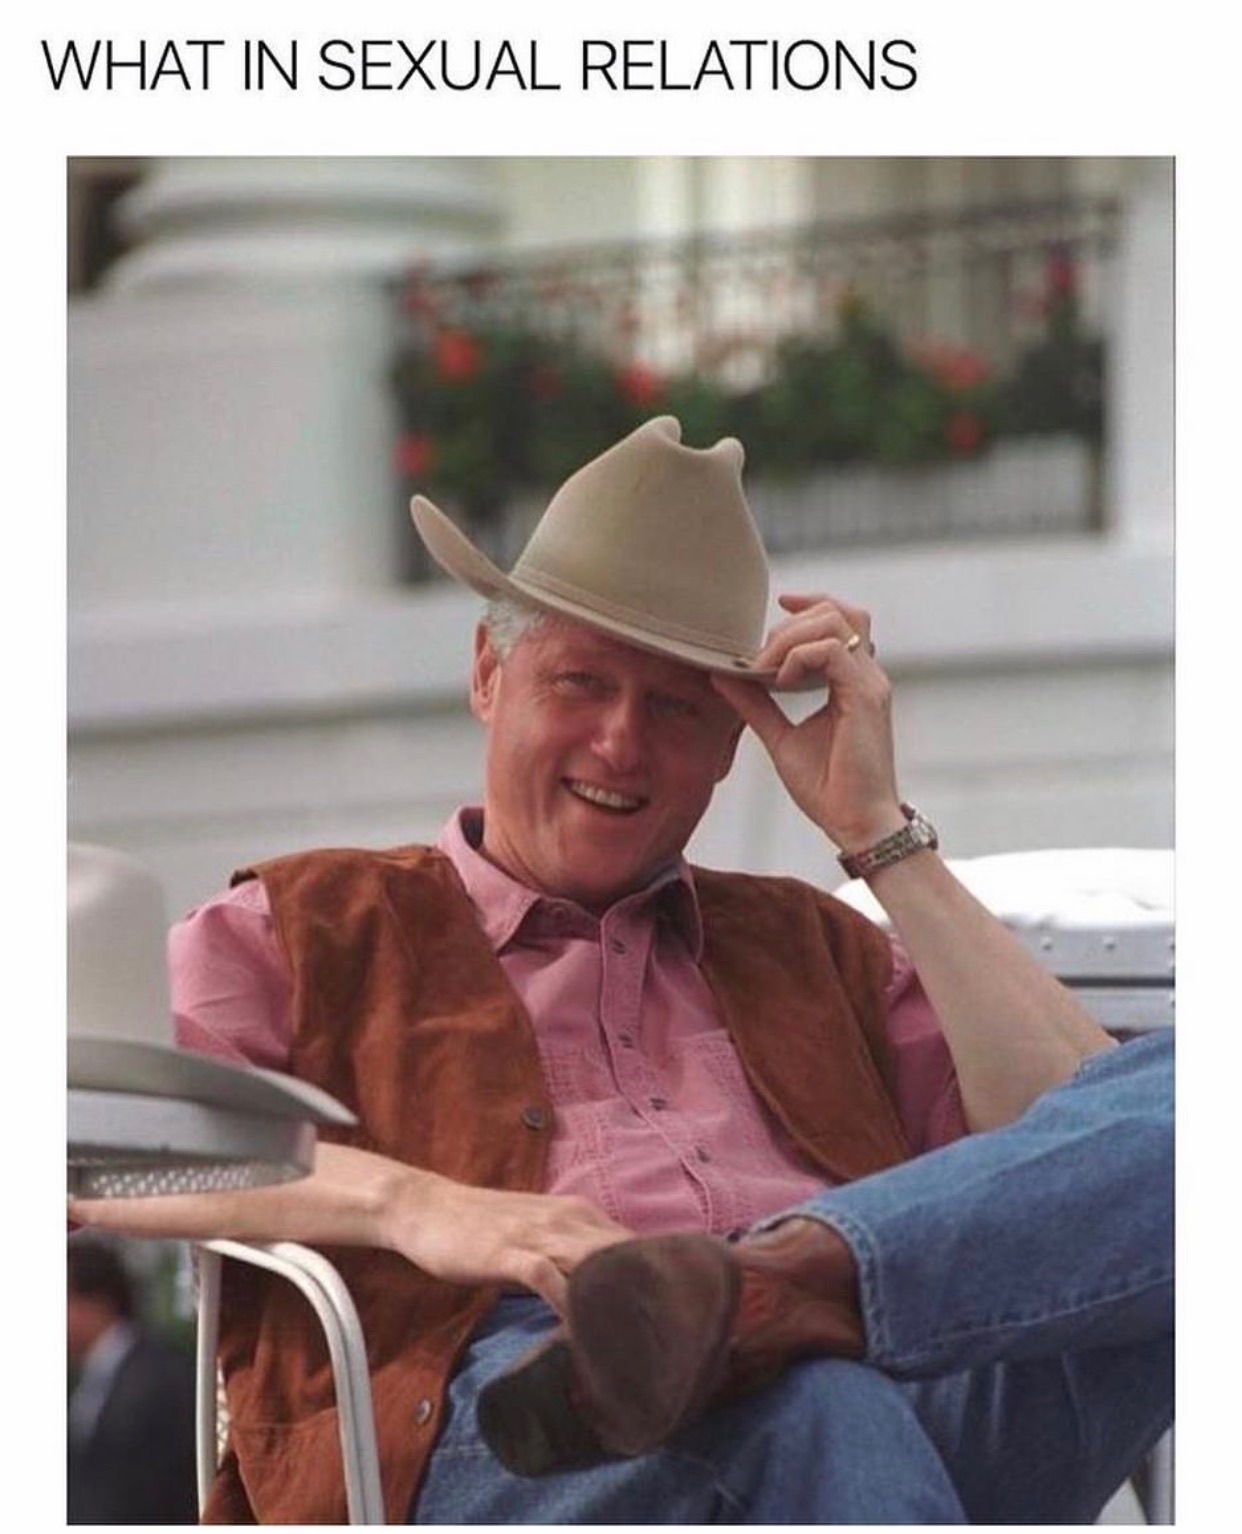 sexual relations meme - What In Sexual Relations